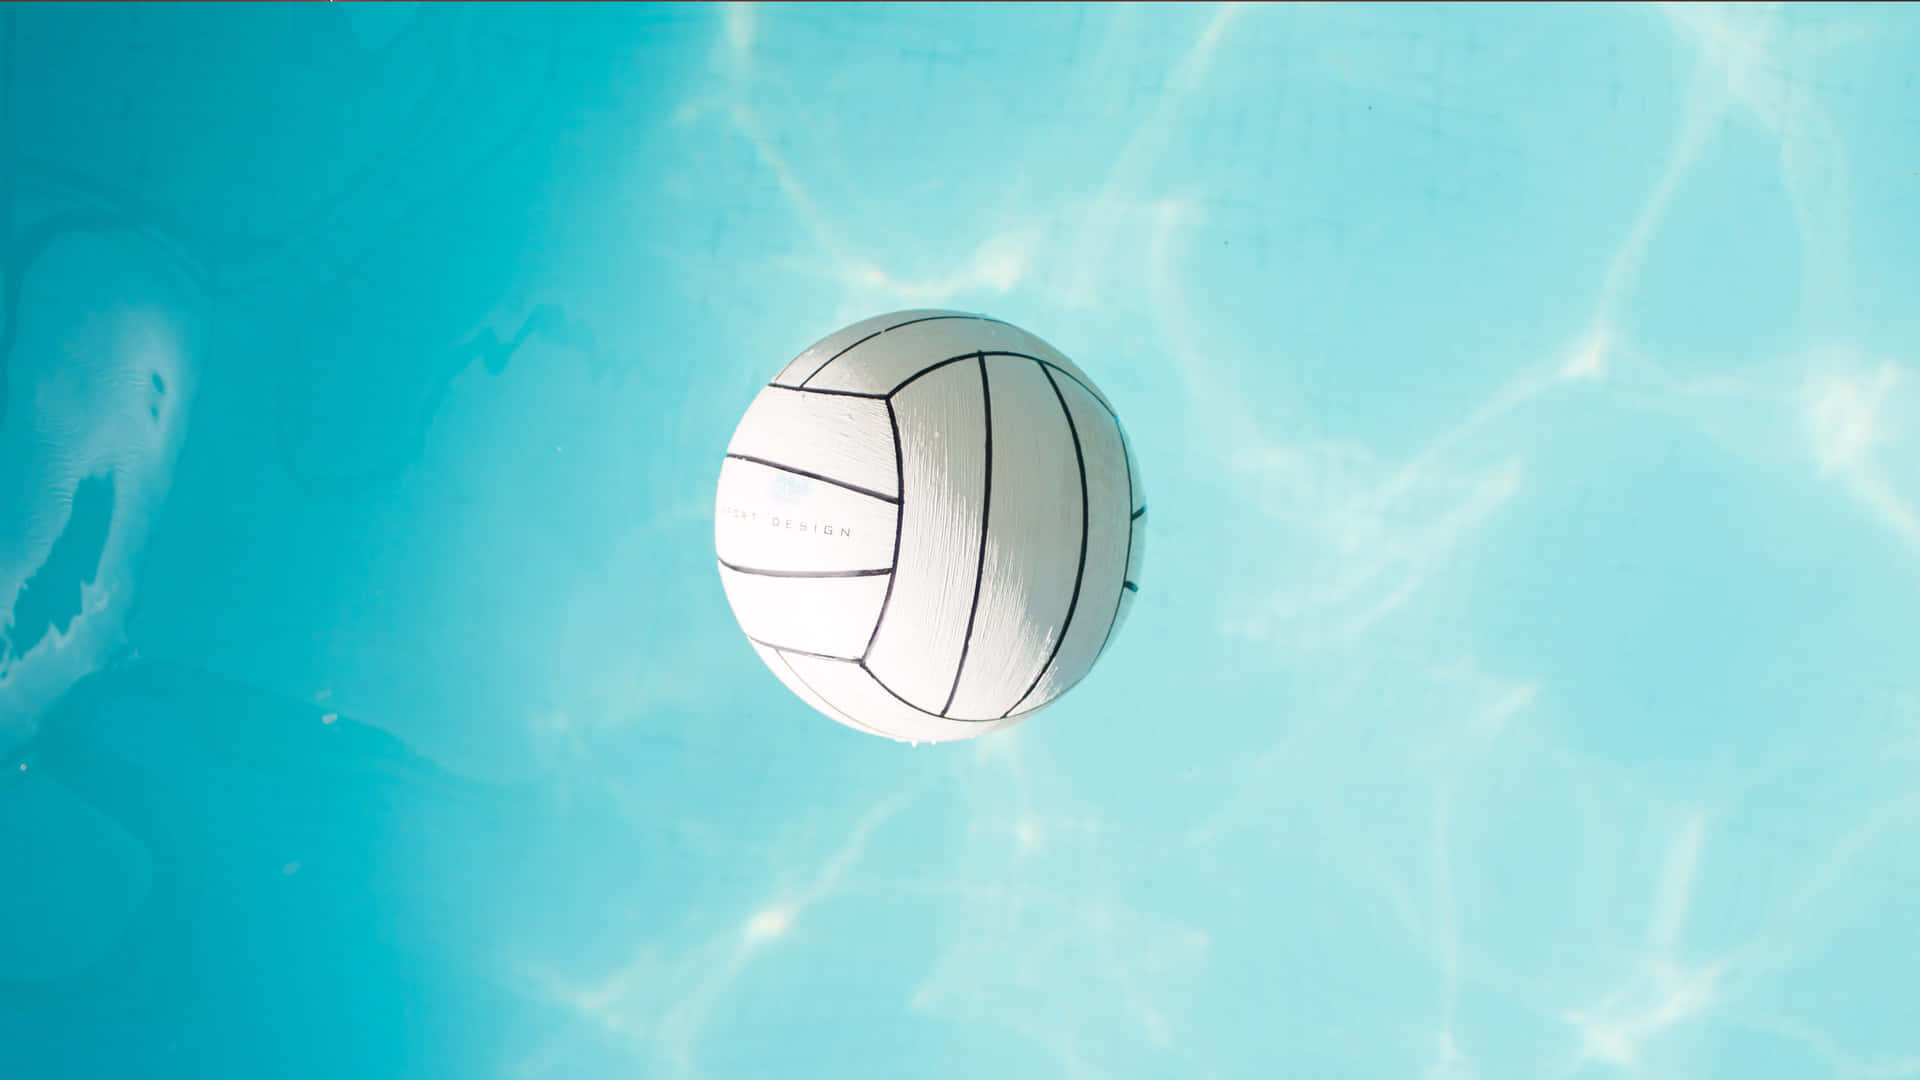 4k Volleyball Background Water Pool Photoshoot